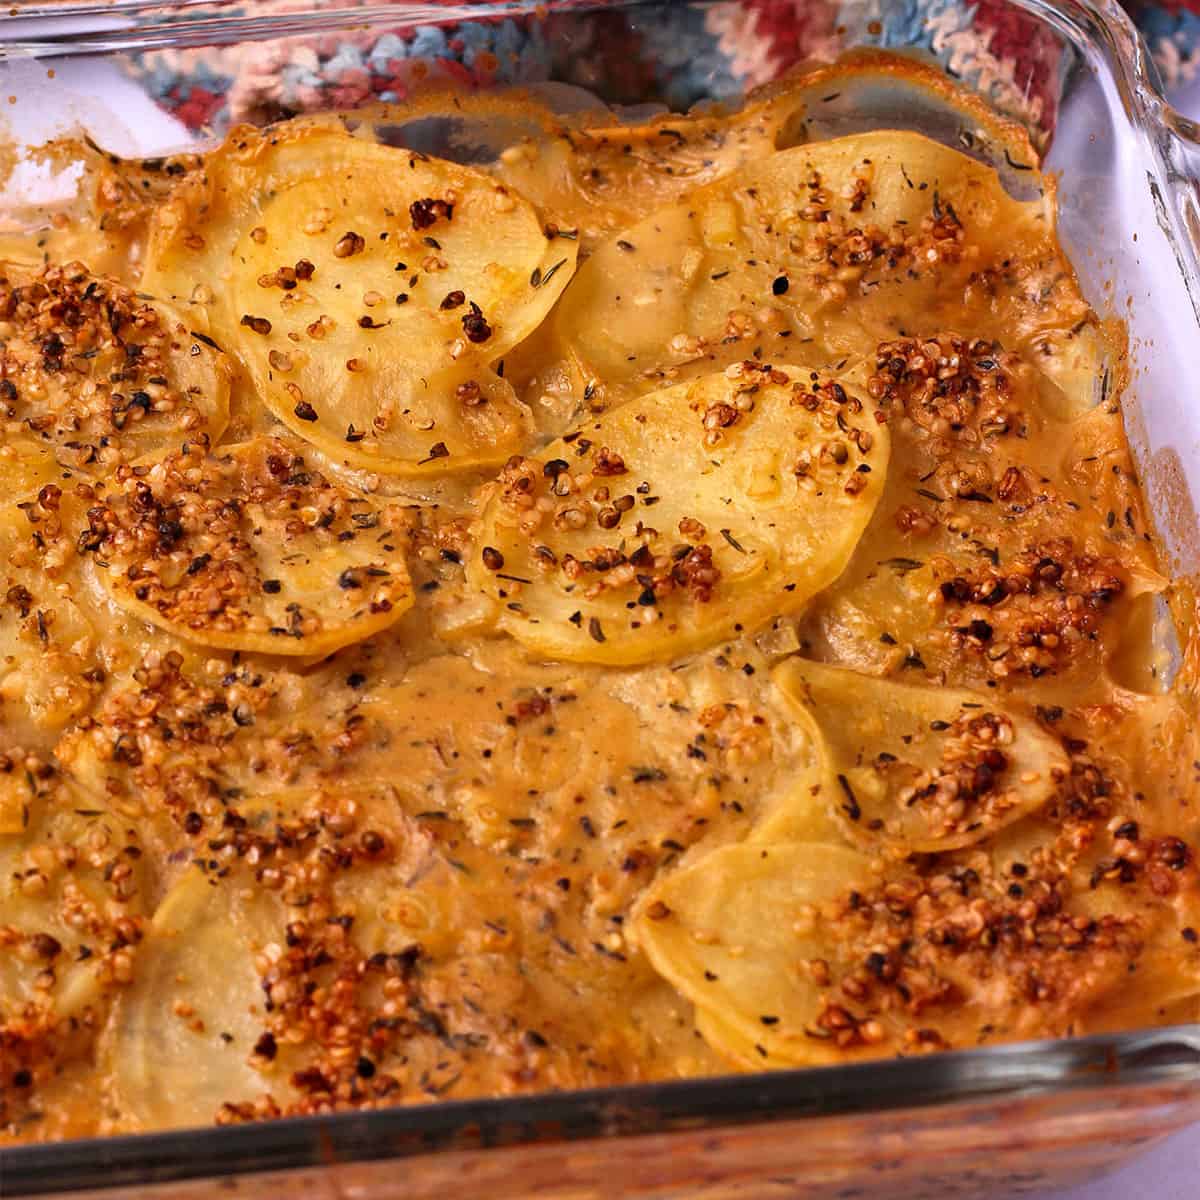 Vegan scalloped potatoes with bacon bits in a baking dish.